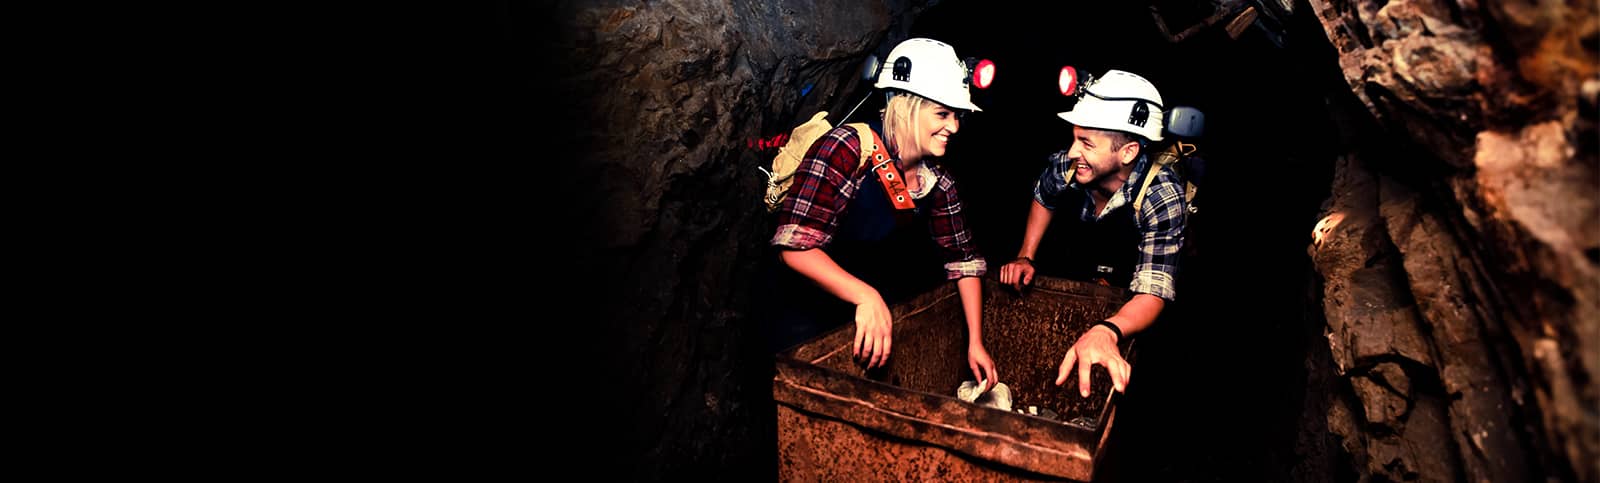 Visitors pushing an Ore Truck on a Nine Levels of Darkness Tour